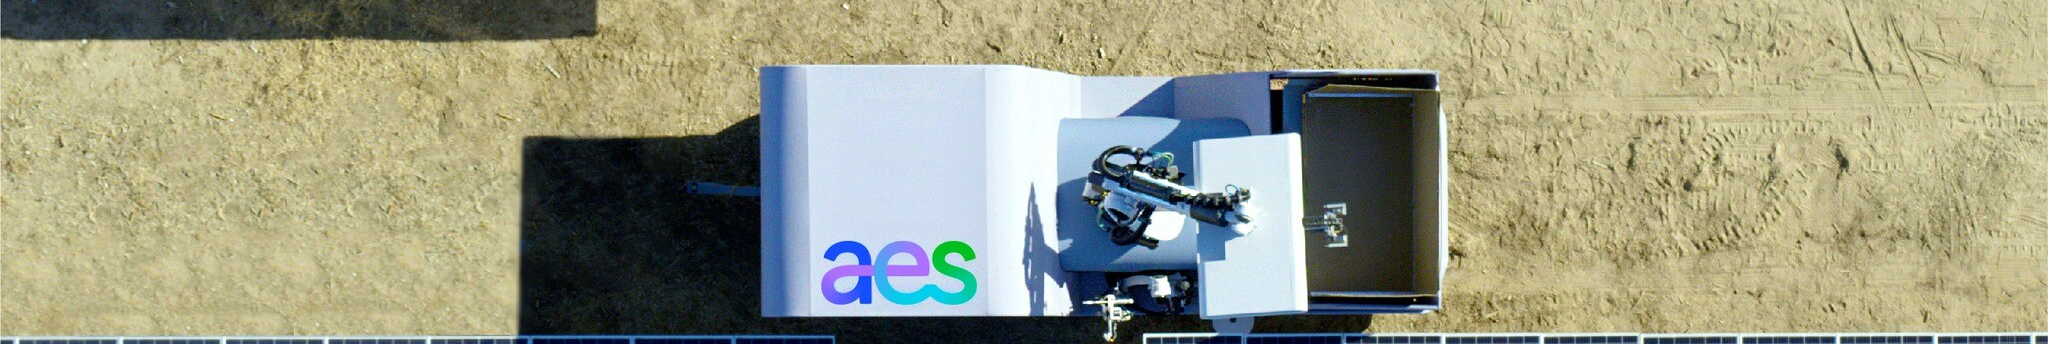 The AES Corporation background